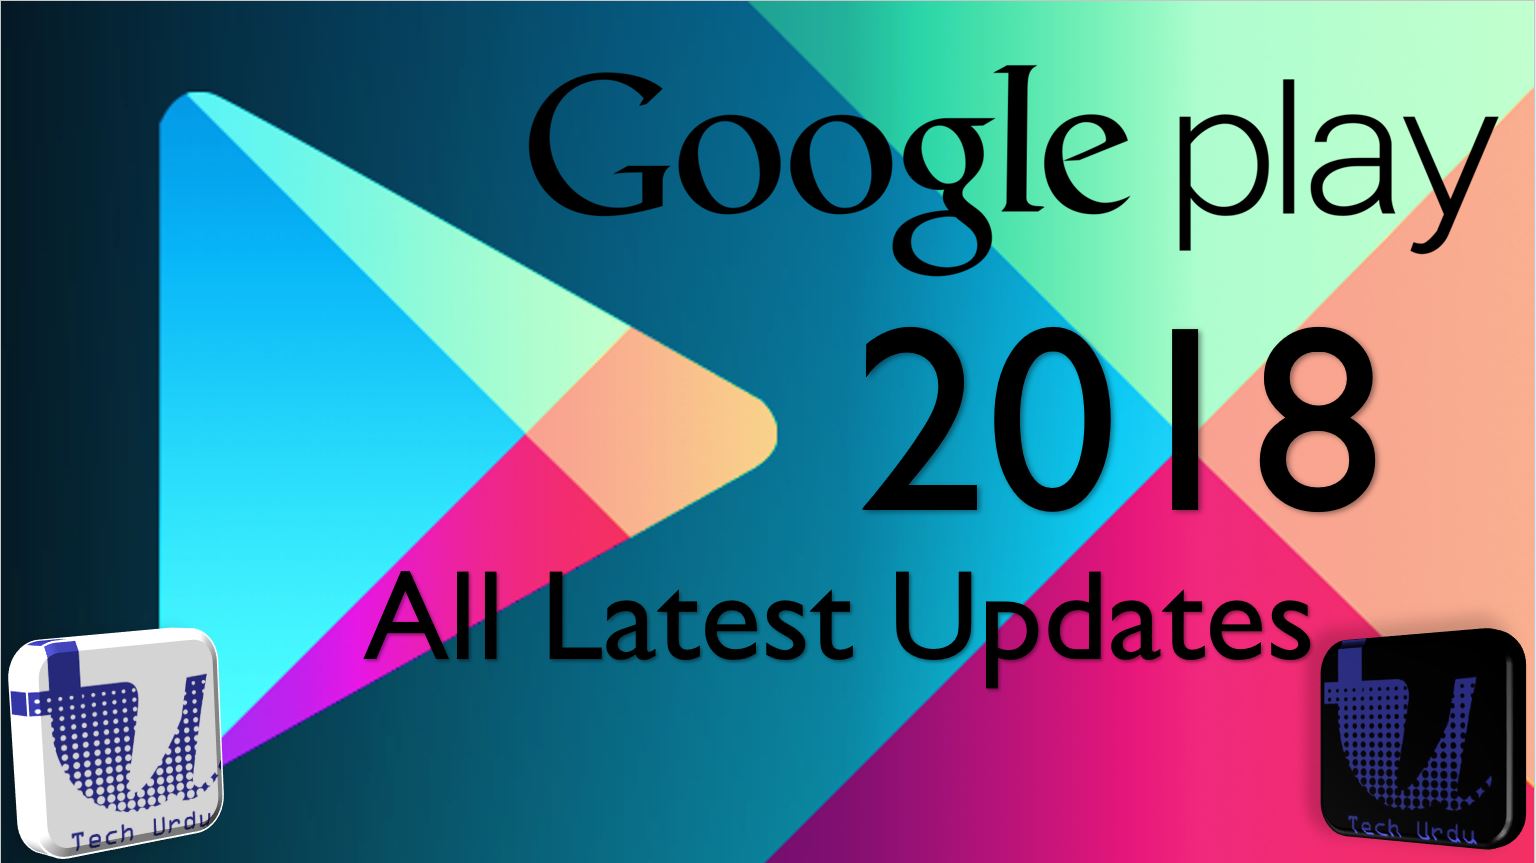 Google Play Store - All Latest Updates and News 2018 - Tech Urdu